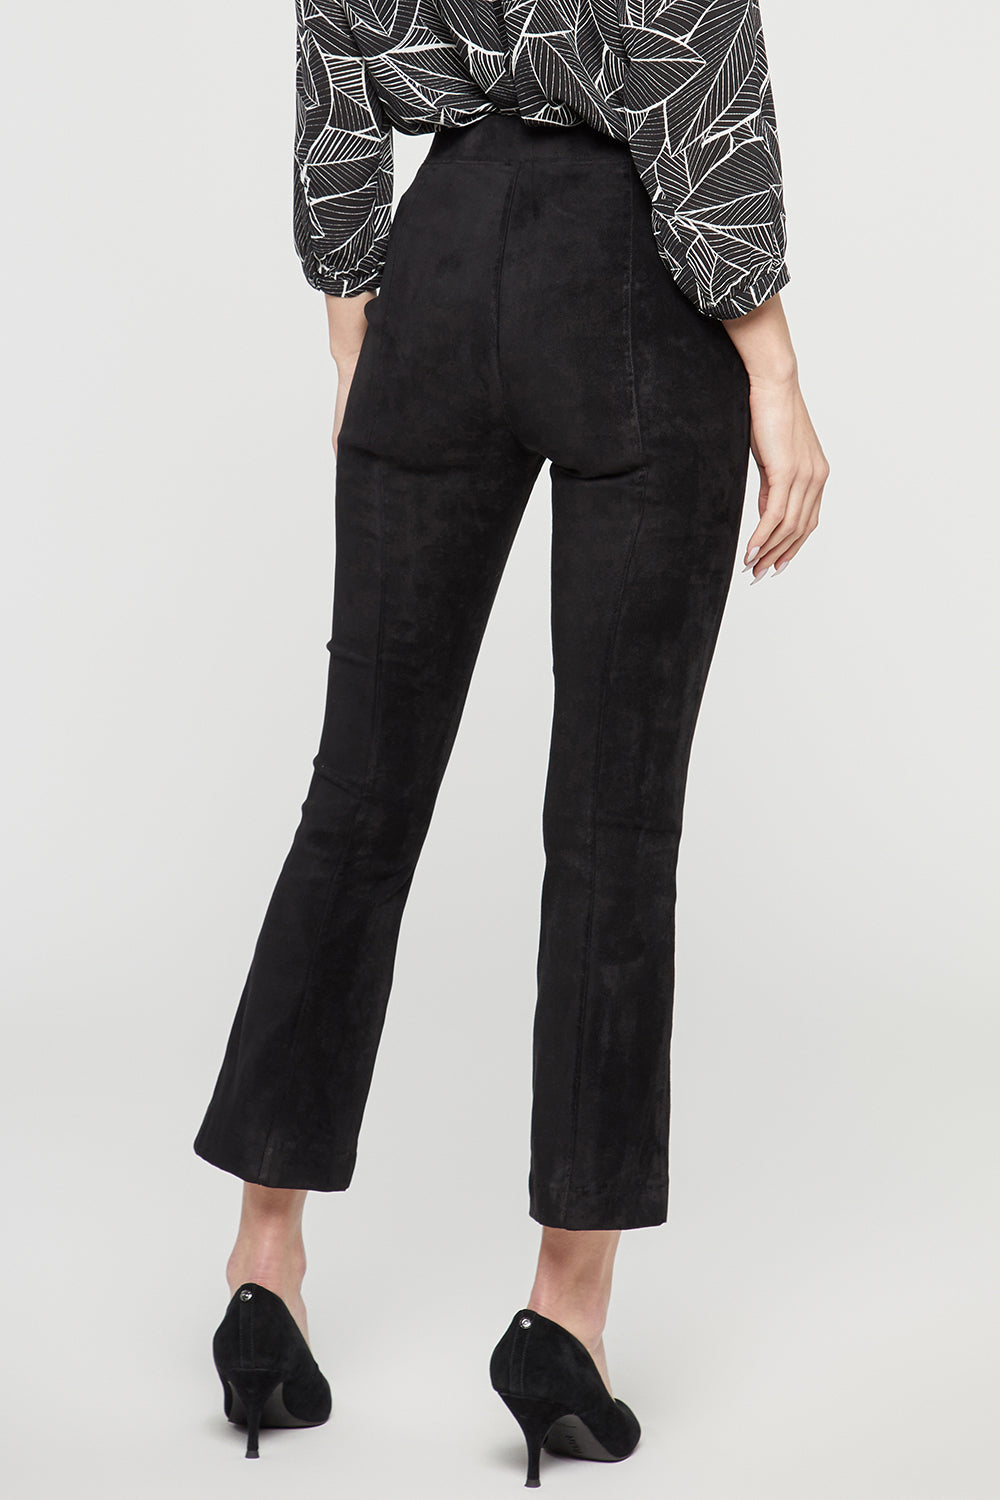 NYDJ Slim Bootcut Pull-On Pants In Stretch Faux Suede - Black